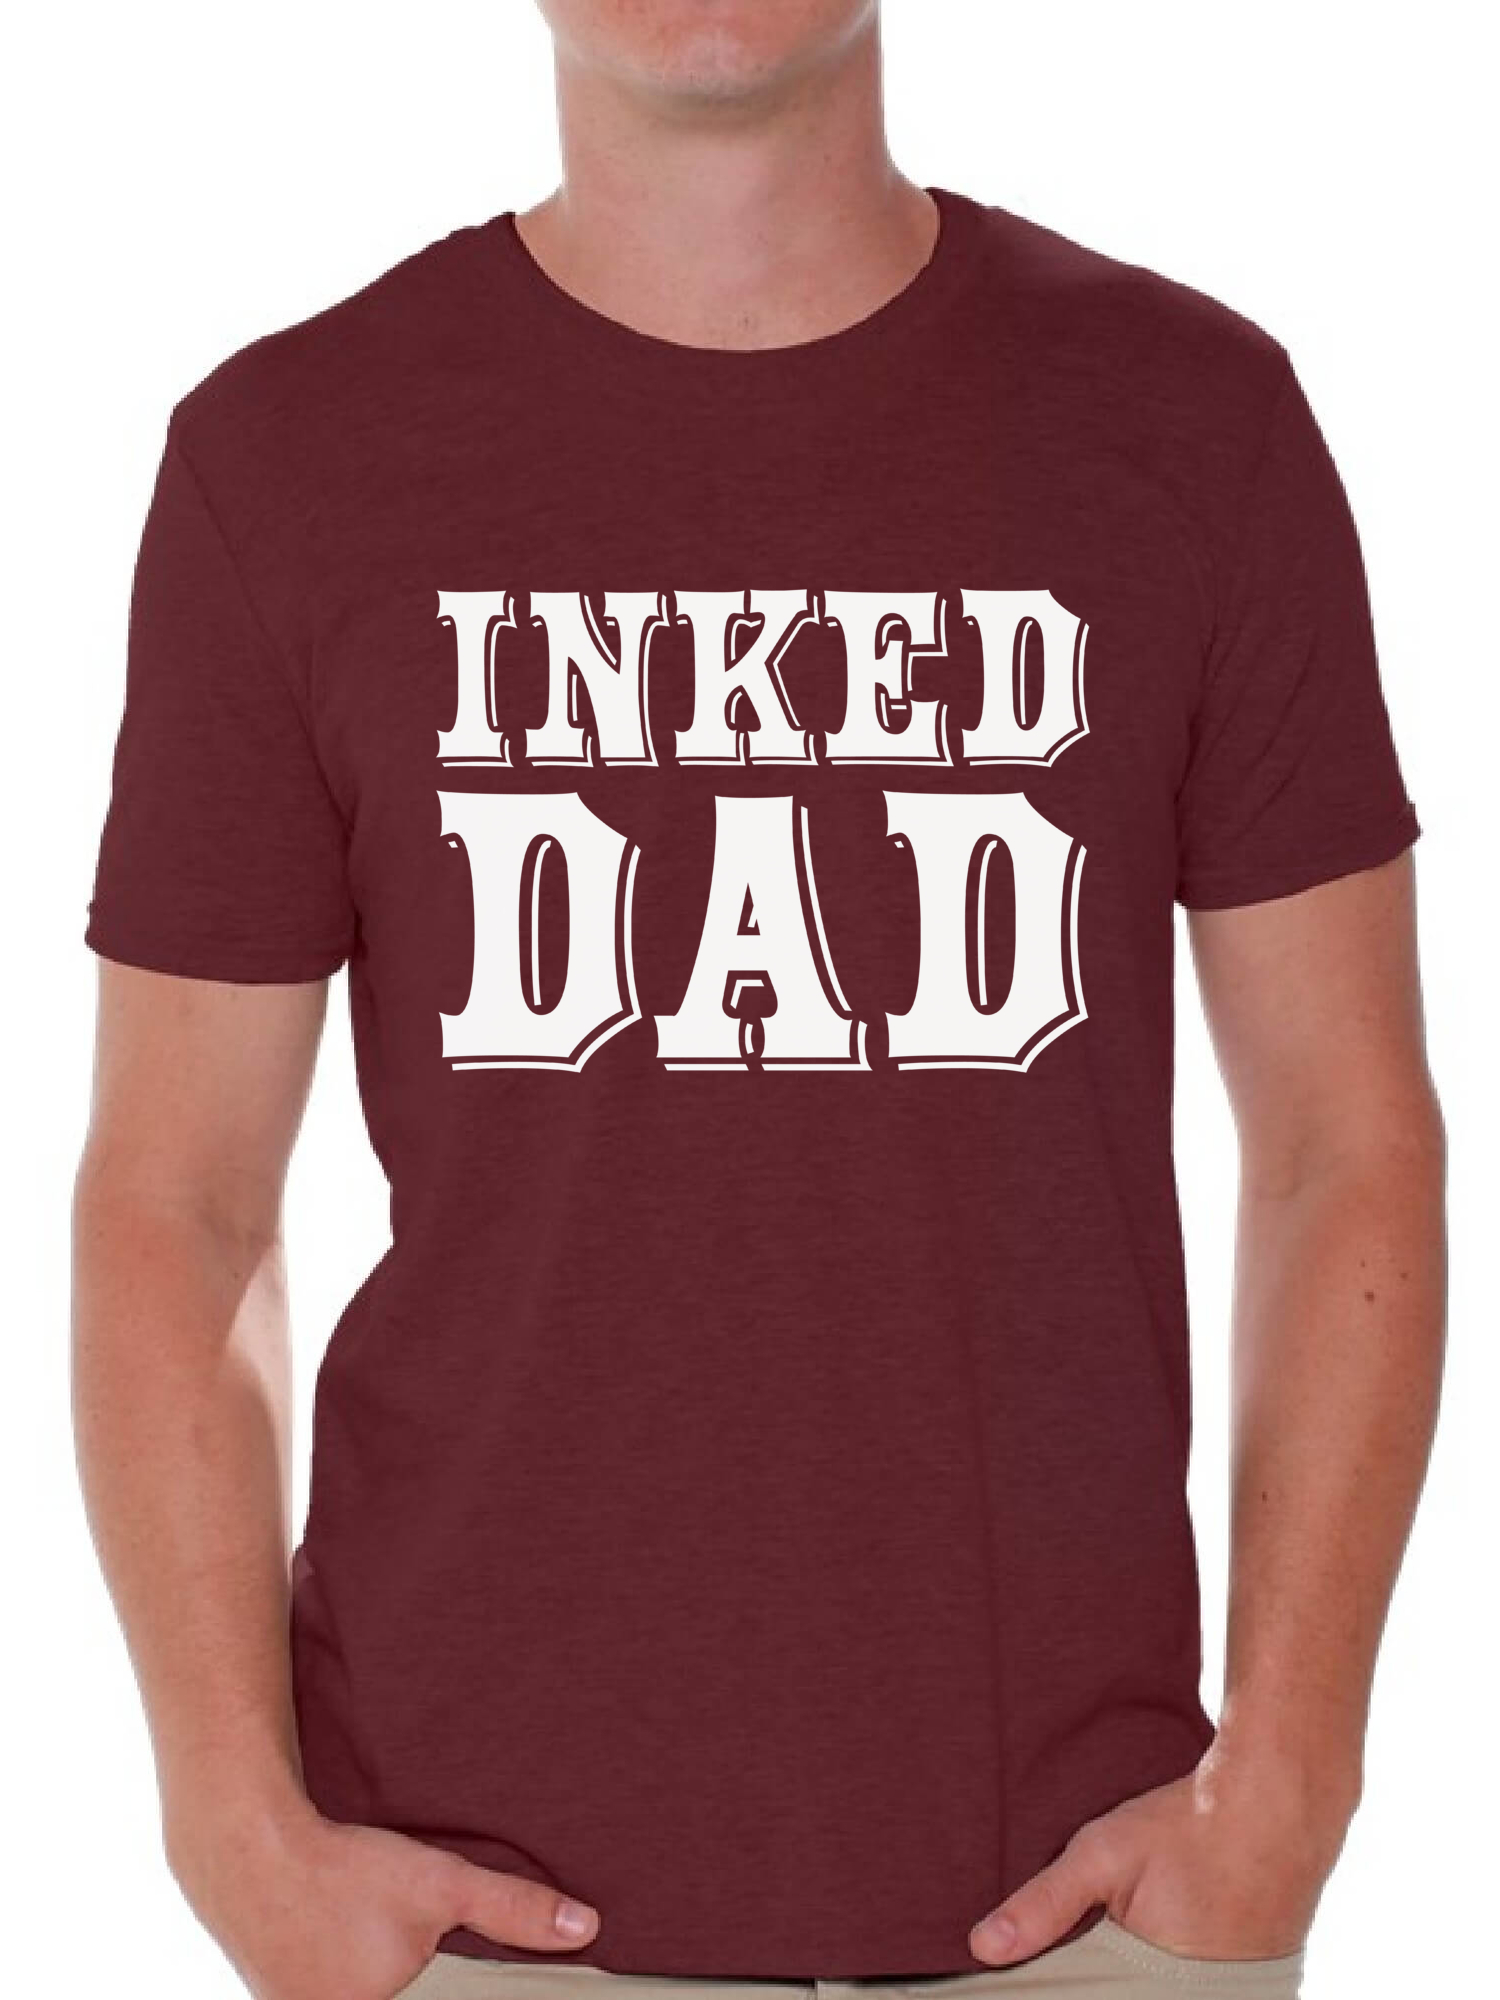 Awkward Styles Inked Dad Tshirt for Men Tattooed Dad Shirt Tatted Dad T Shirt Best Gifts for Dad Cool Tattoo Dad Shirt Tattoo Shirts with Sayings for Men Amazing Gifts for Dad Top Dad Shirt - image 1 of 4